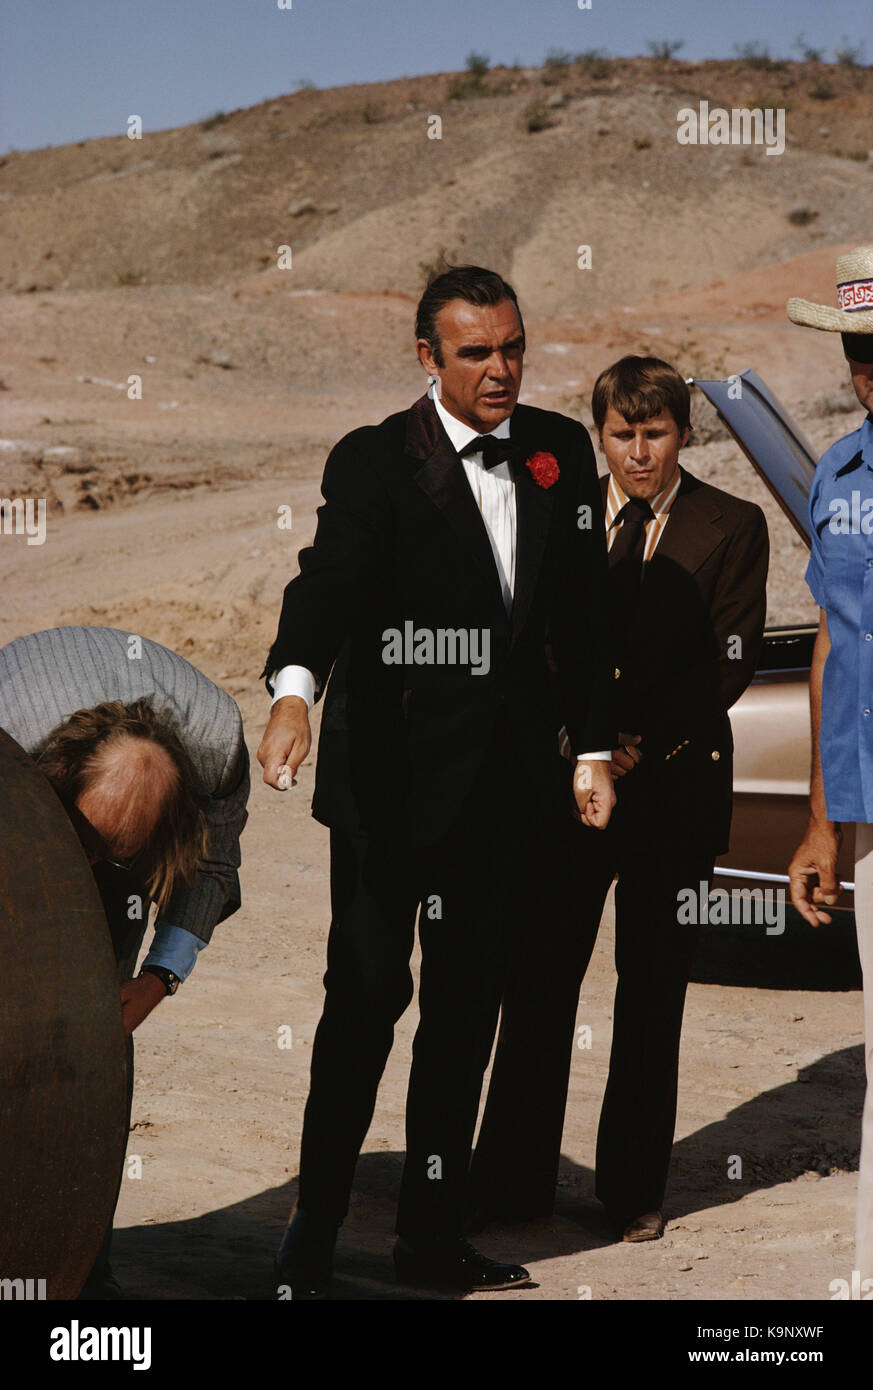 Scottish actor Sean Connery with actors Putter Smith (left) and Bruce Glover (right) on the set of the James Bond film 'Diamonds Are Forever', USA, Ma Stock Photo